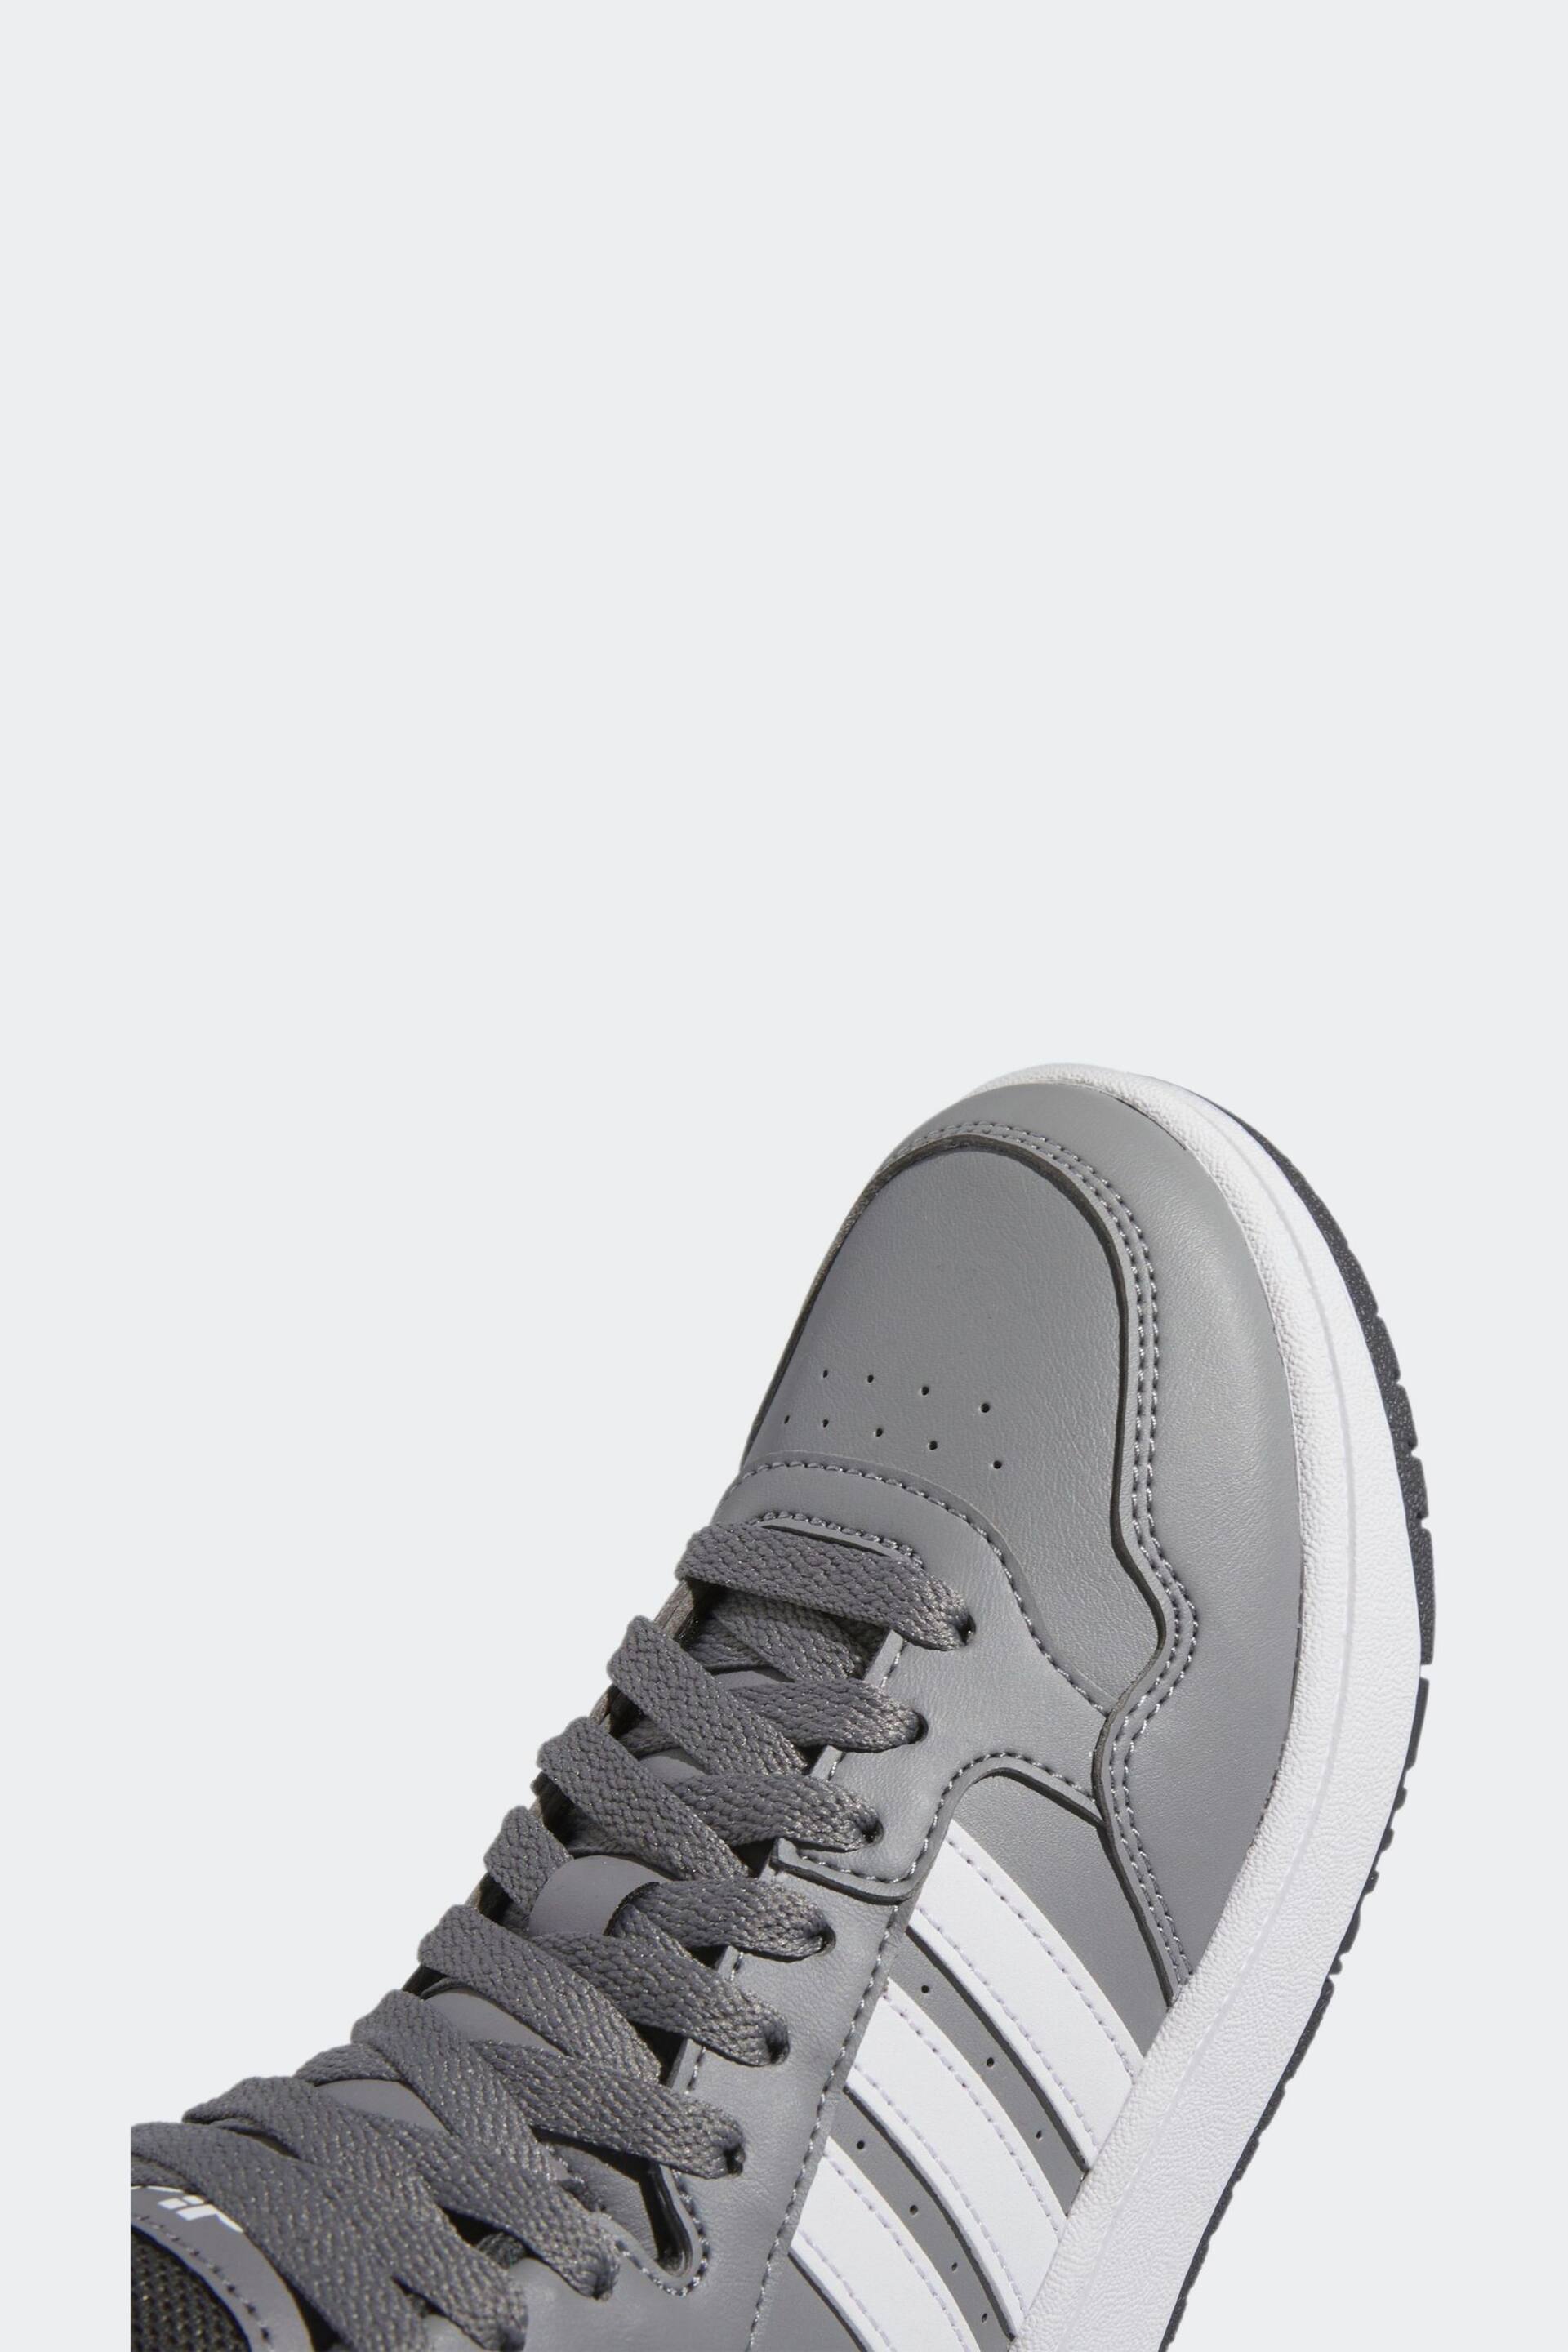 adidas Grey White Hoops Mid Shoes - Image 8 of 9